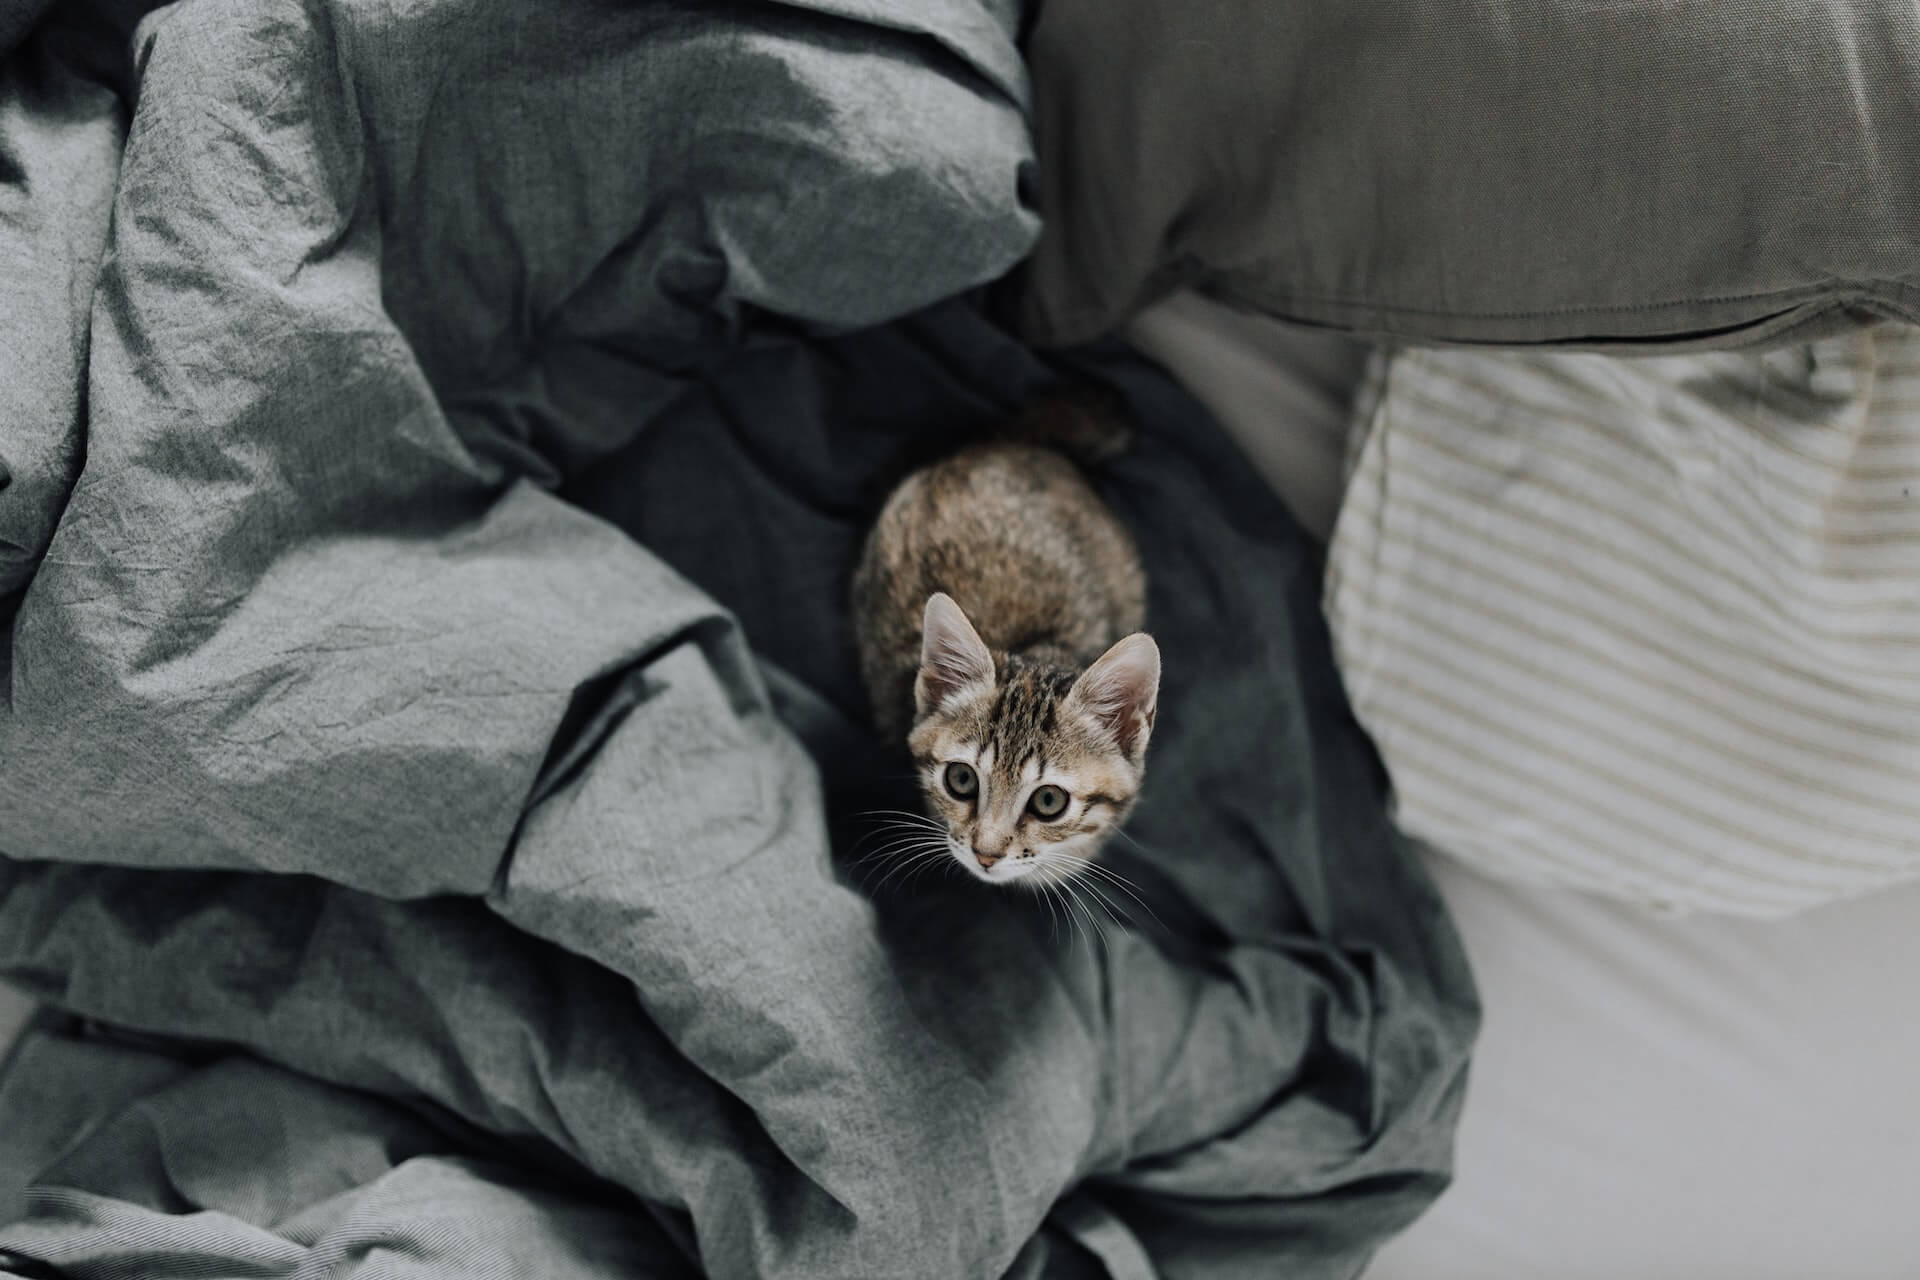 Brown tabby cat sitting on a grey bed.